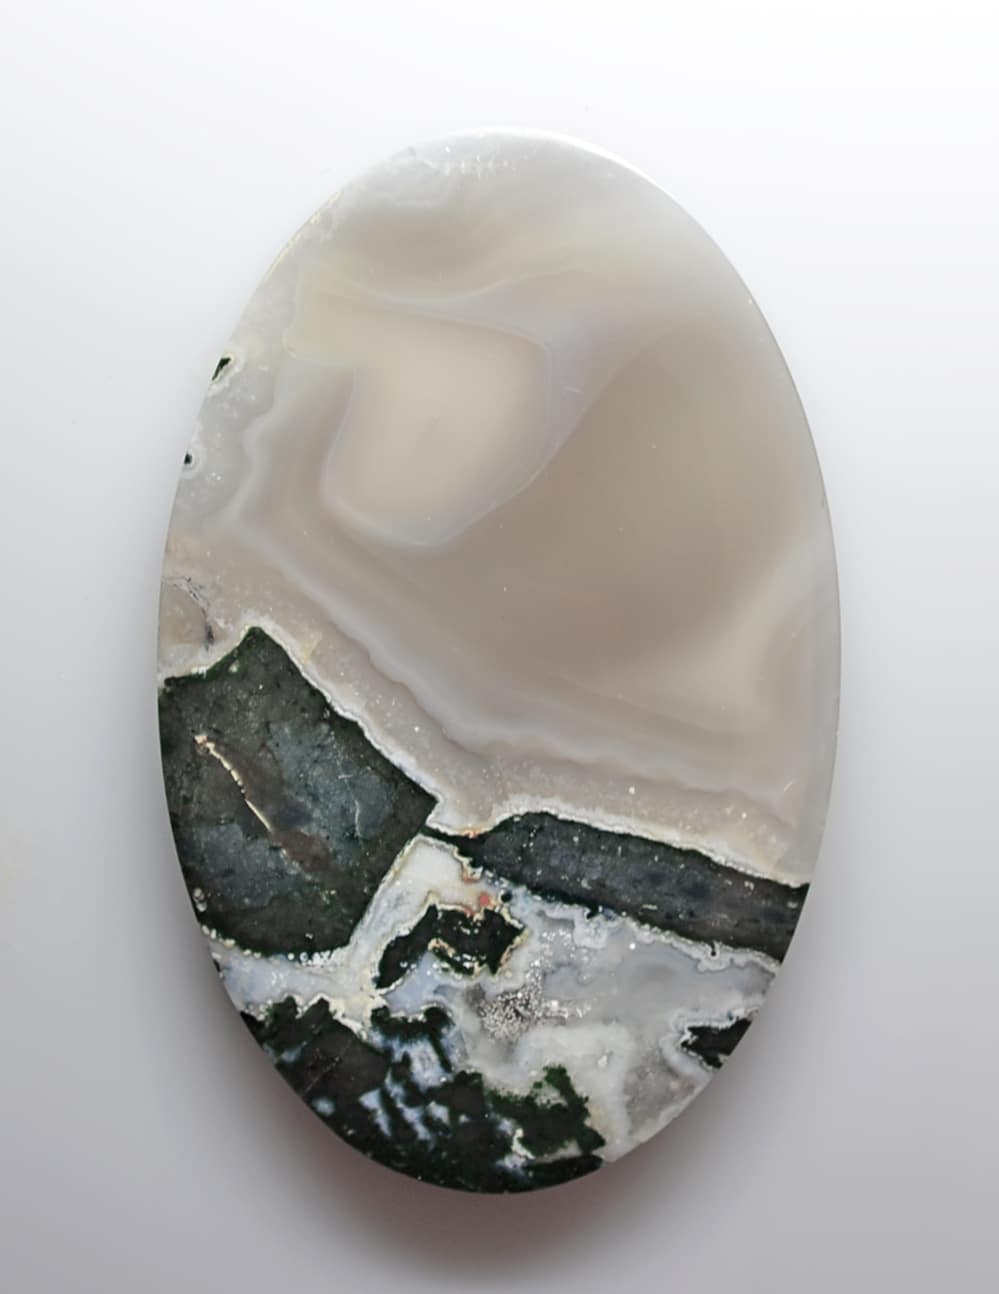 Rock Moss Agate 93.37 ct Oval Cabochon Collection (1) 63.60 x 41.50 x 4.20 mm Indonesia max3021